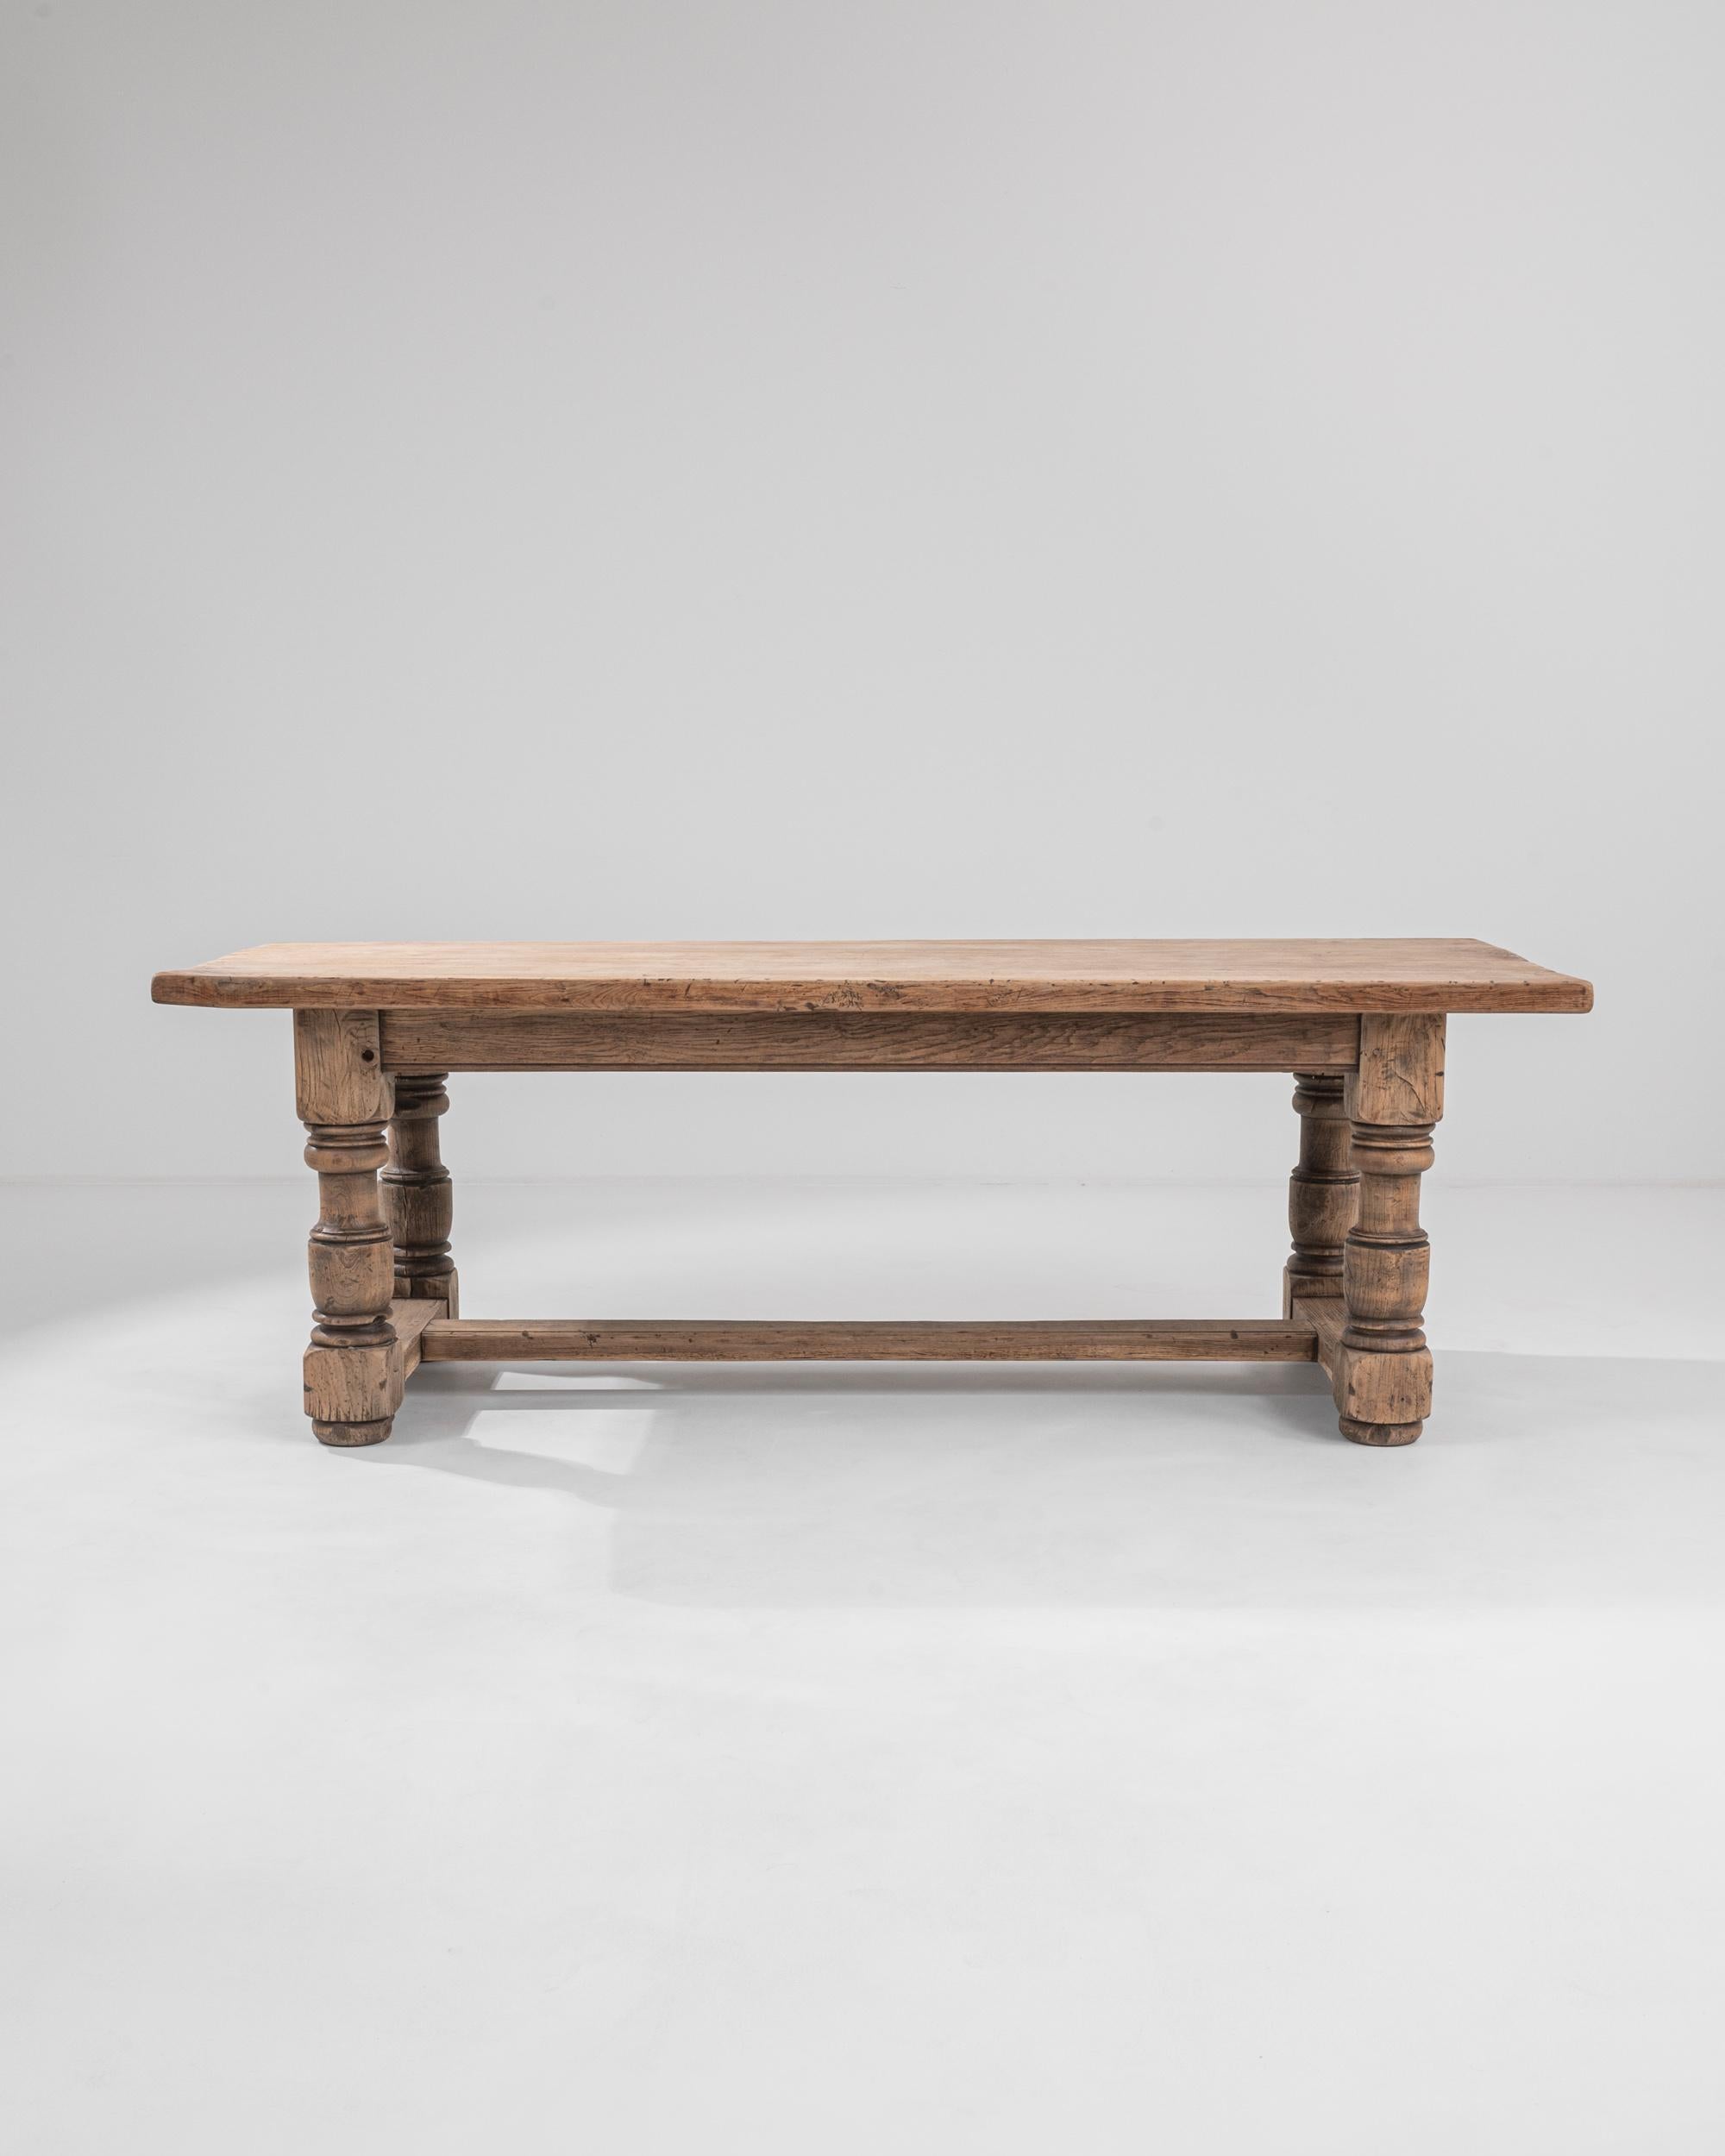 A dining table from Belgium, circa 1950. The thick, sturdy planks of wood that form the table top and legs of this monumental trestle table exude a calming sense of earthy resilience. The legs of this table have been sumptuously lathed into finely